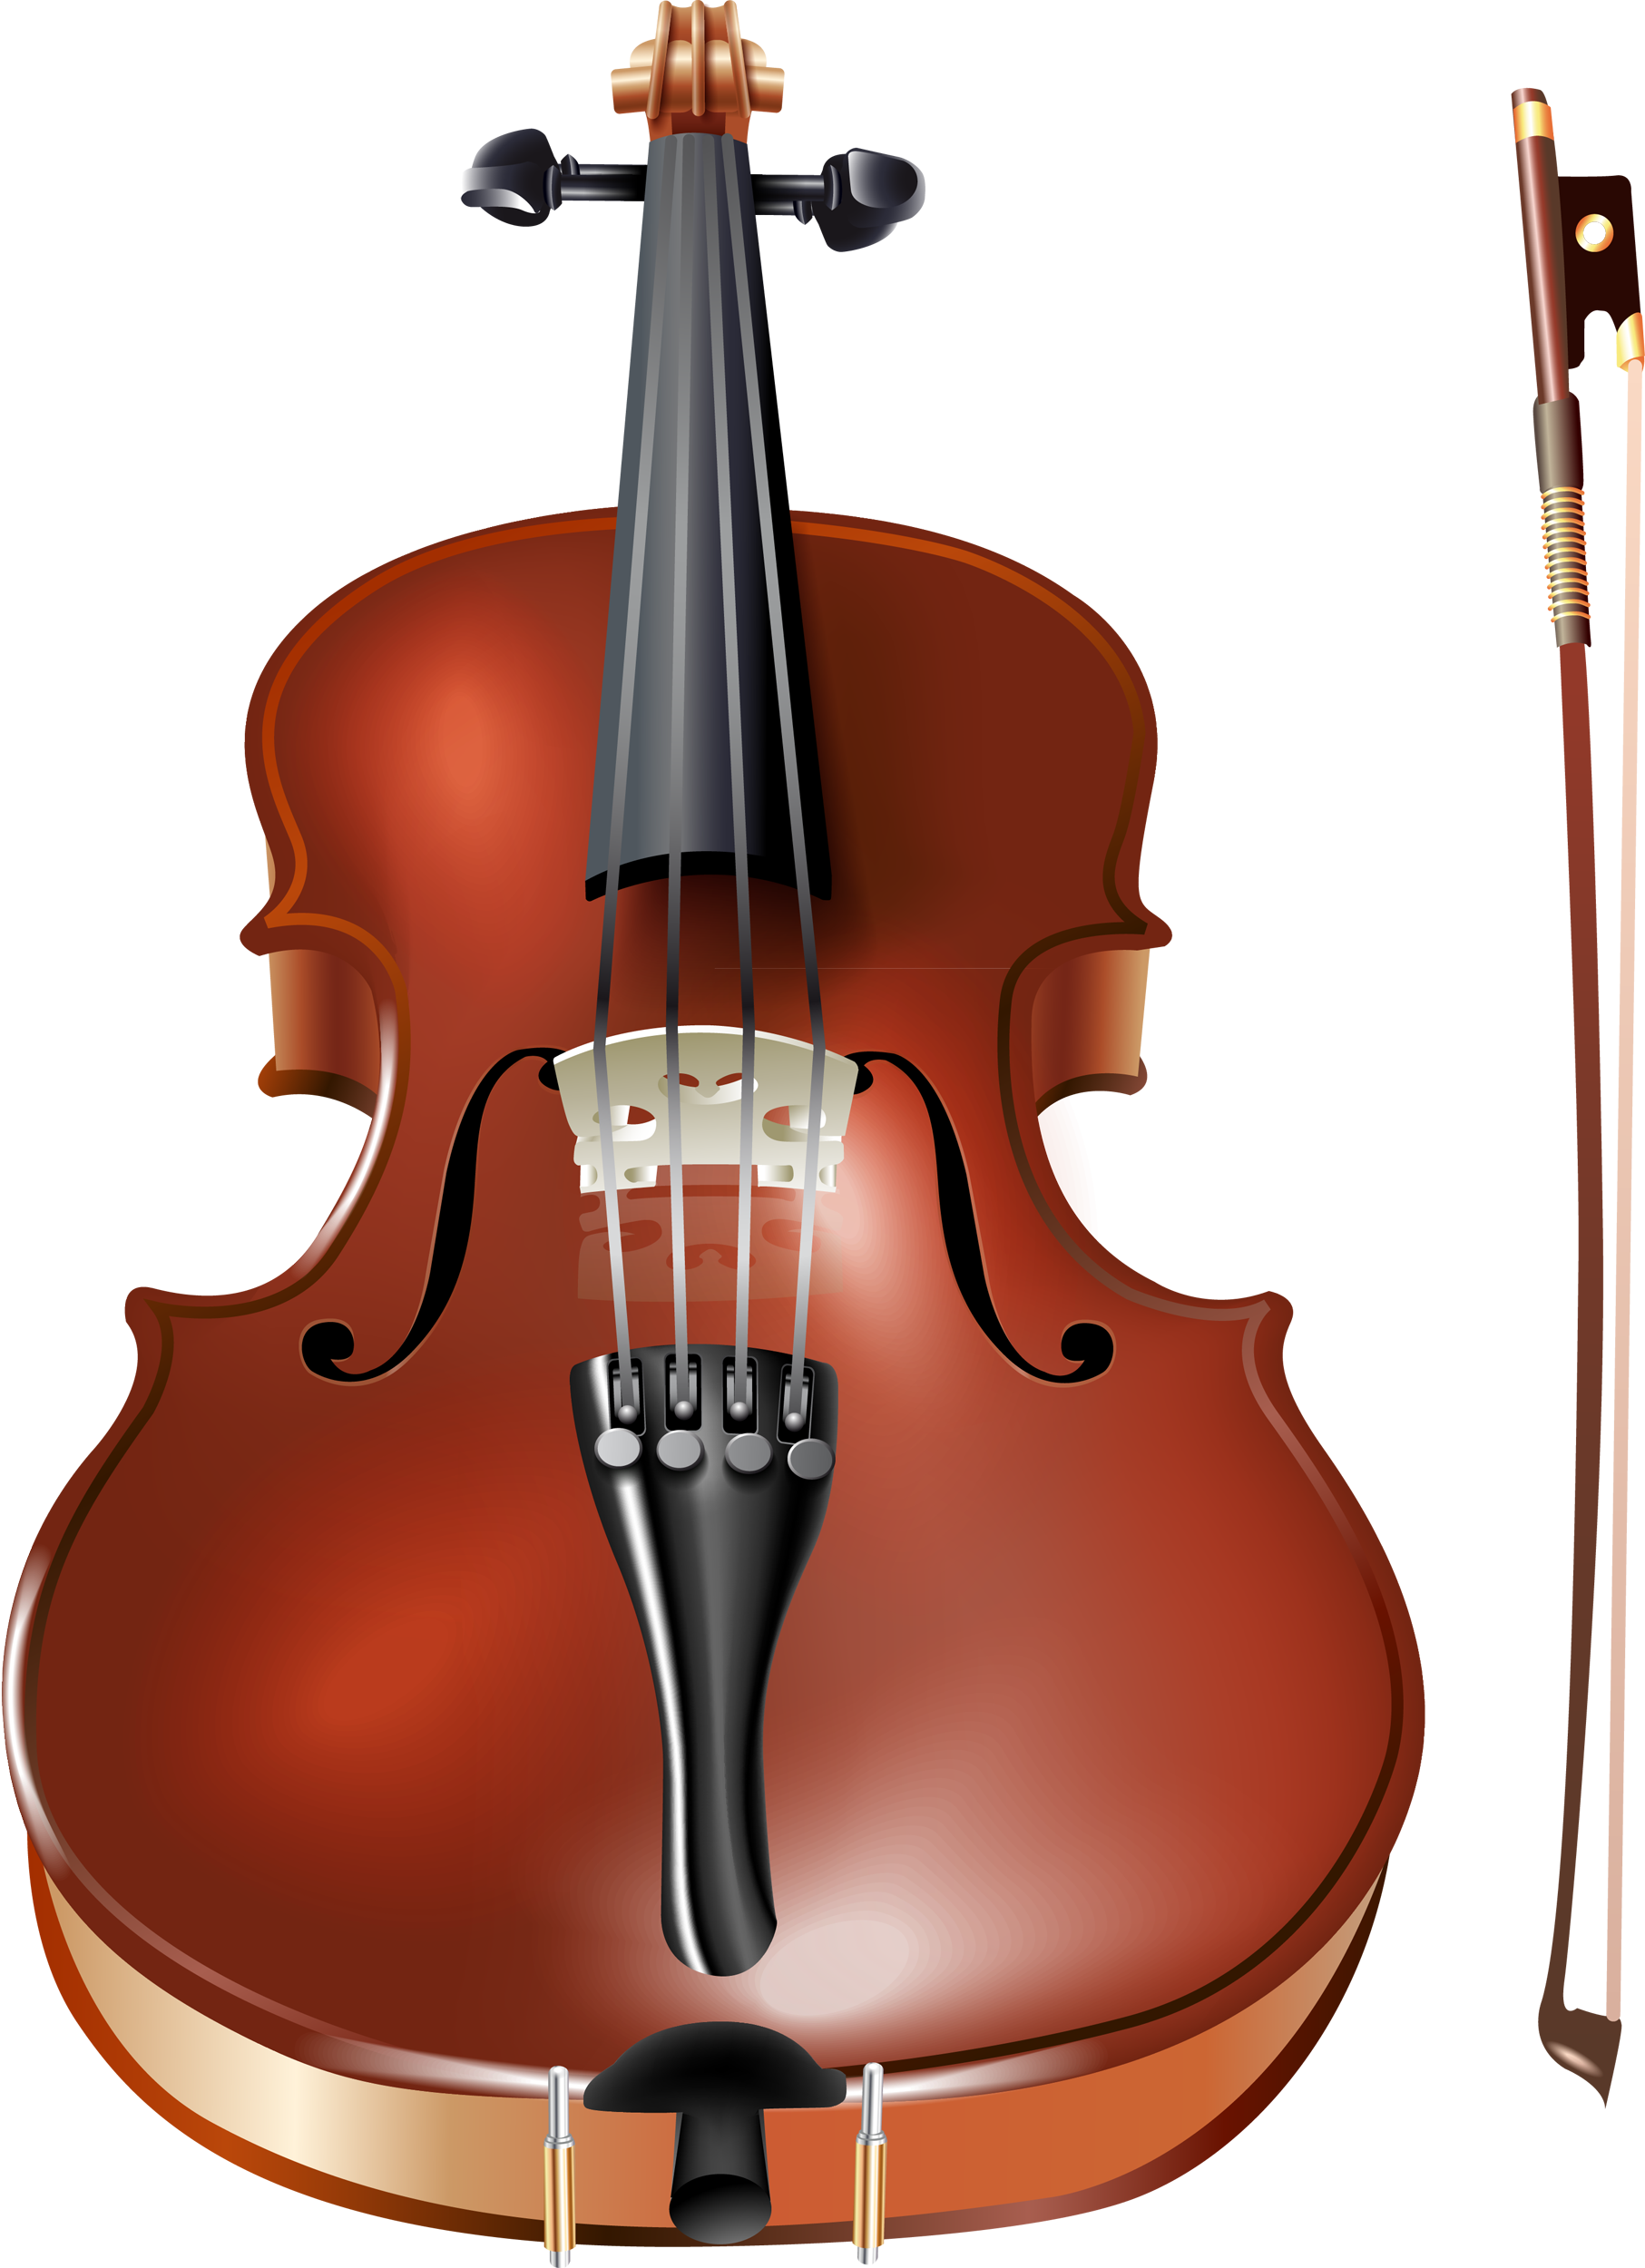 Violin and bow PNG